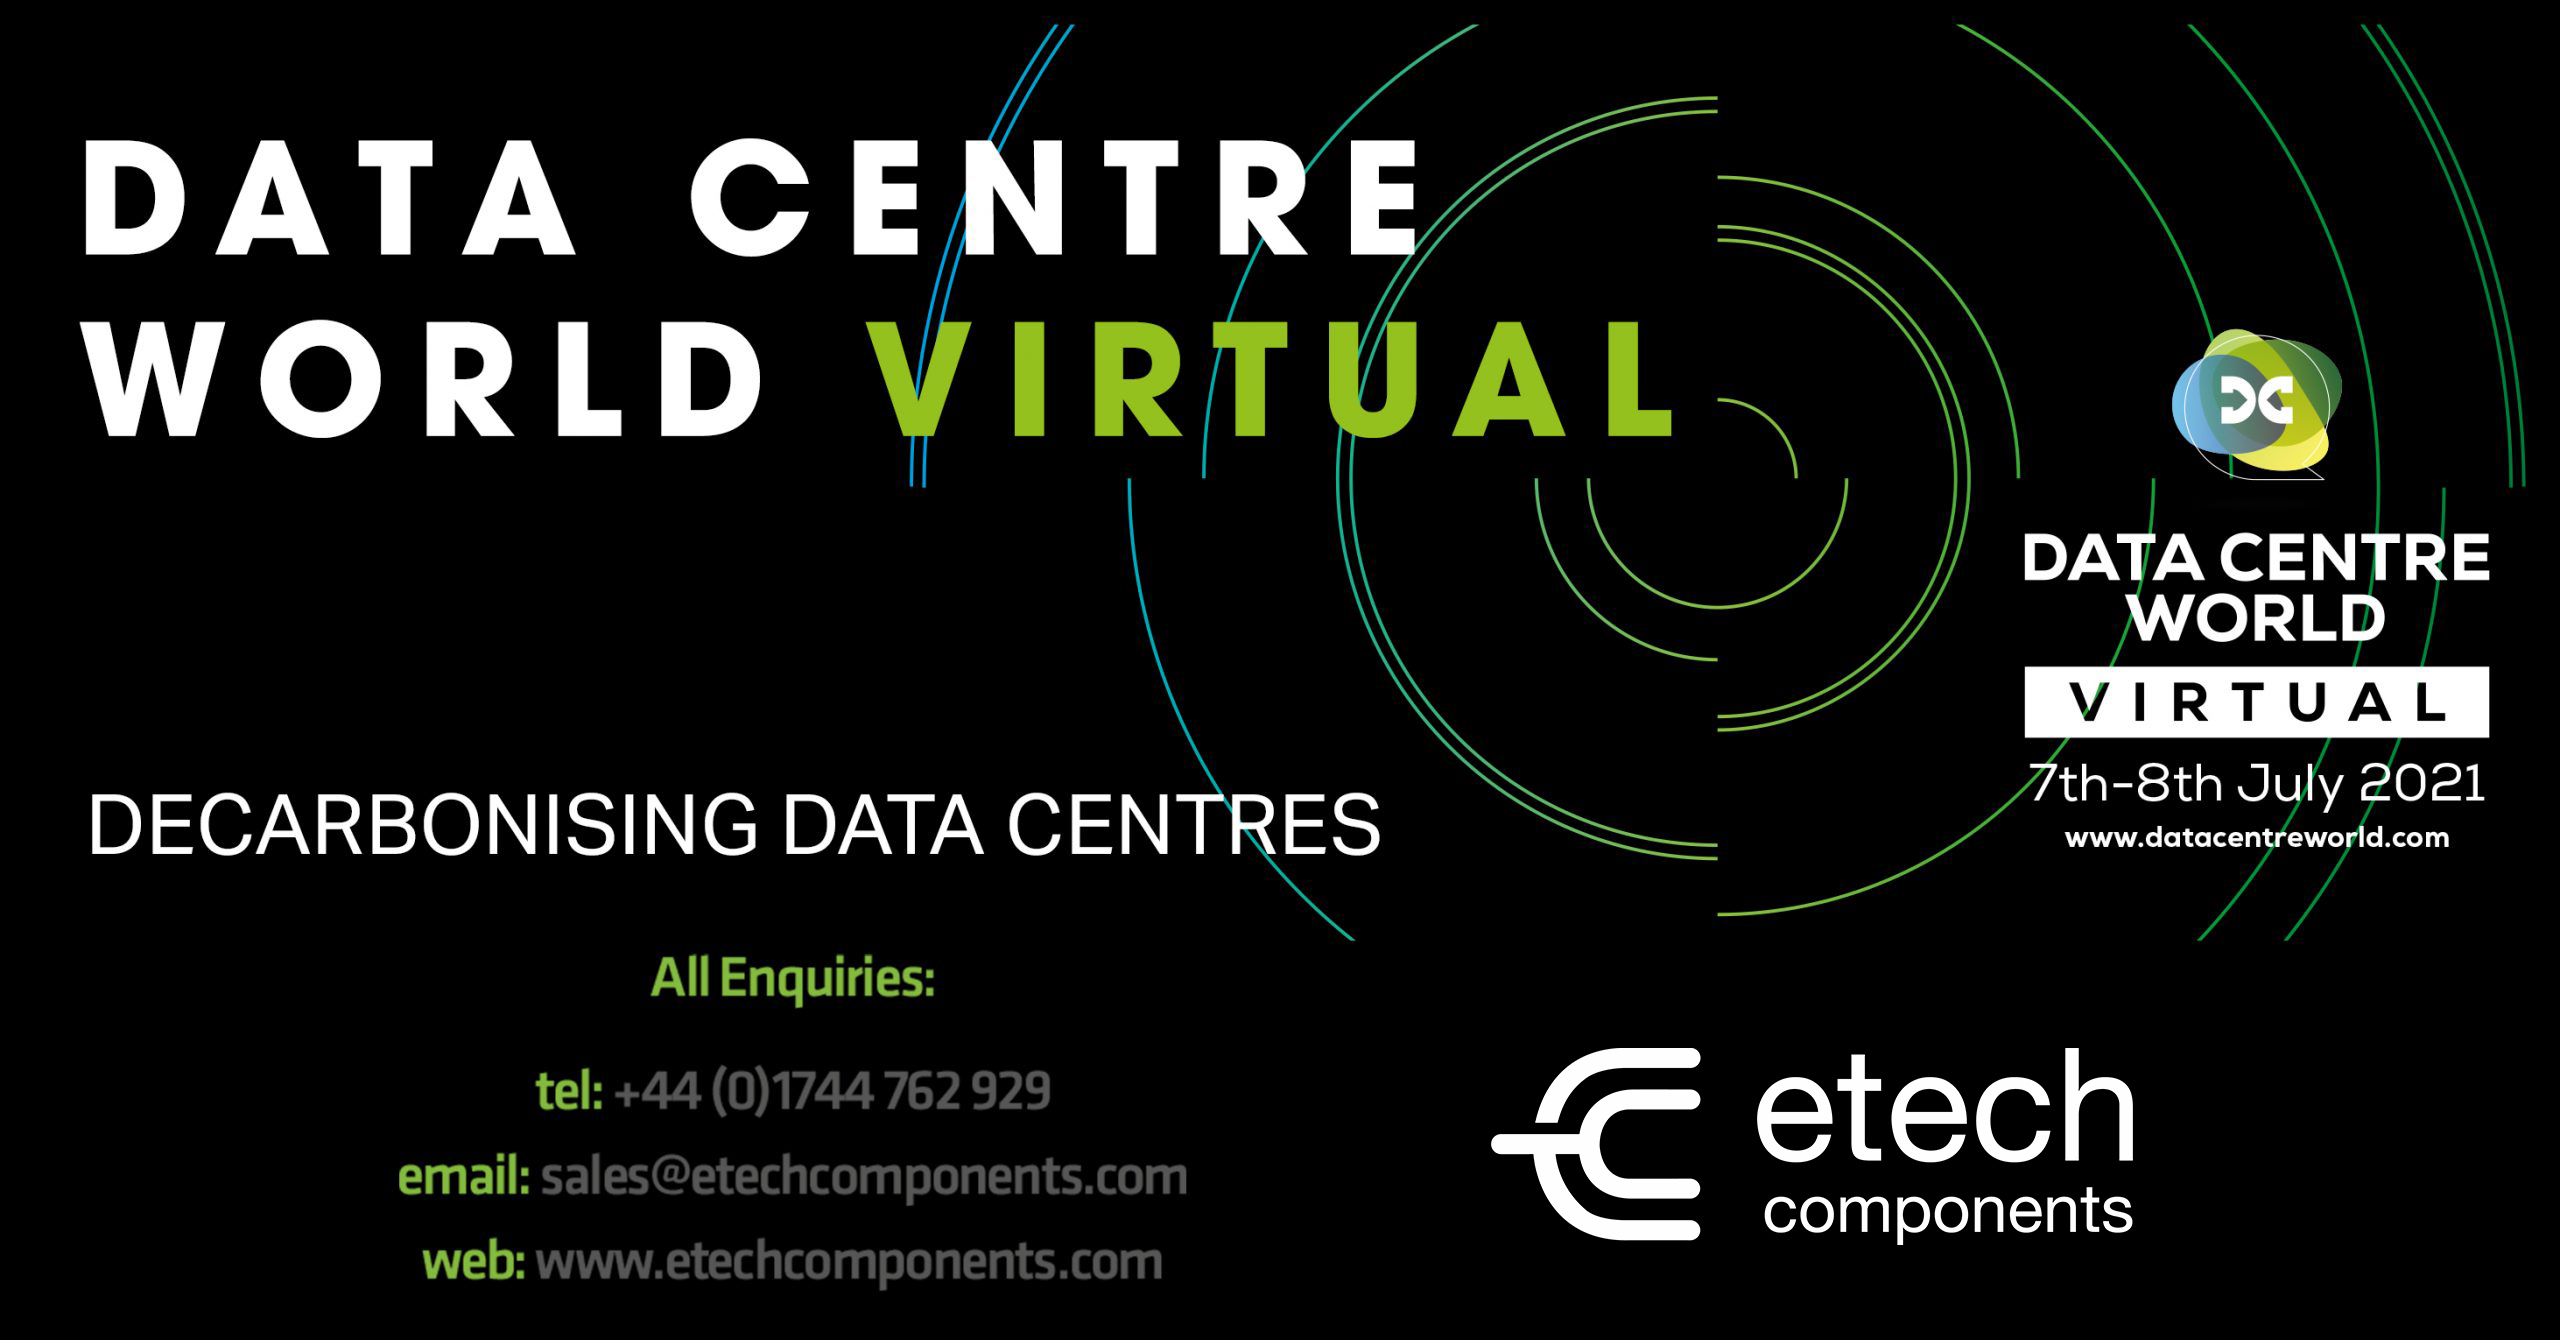 E-Tech are participating in the World's largest Data Centre Event